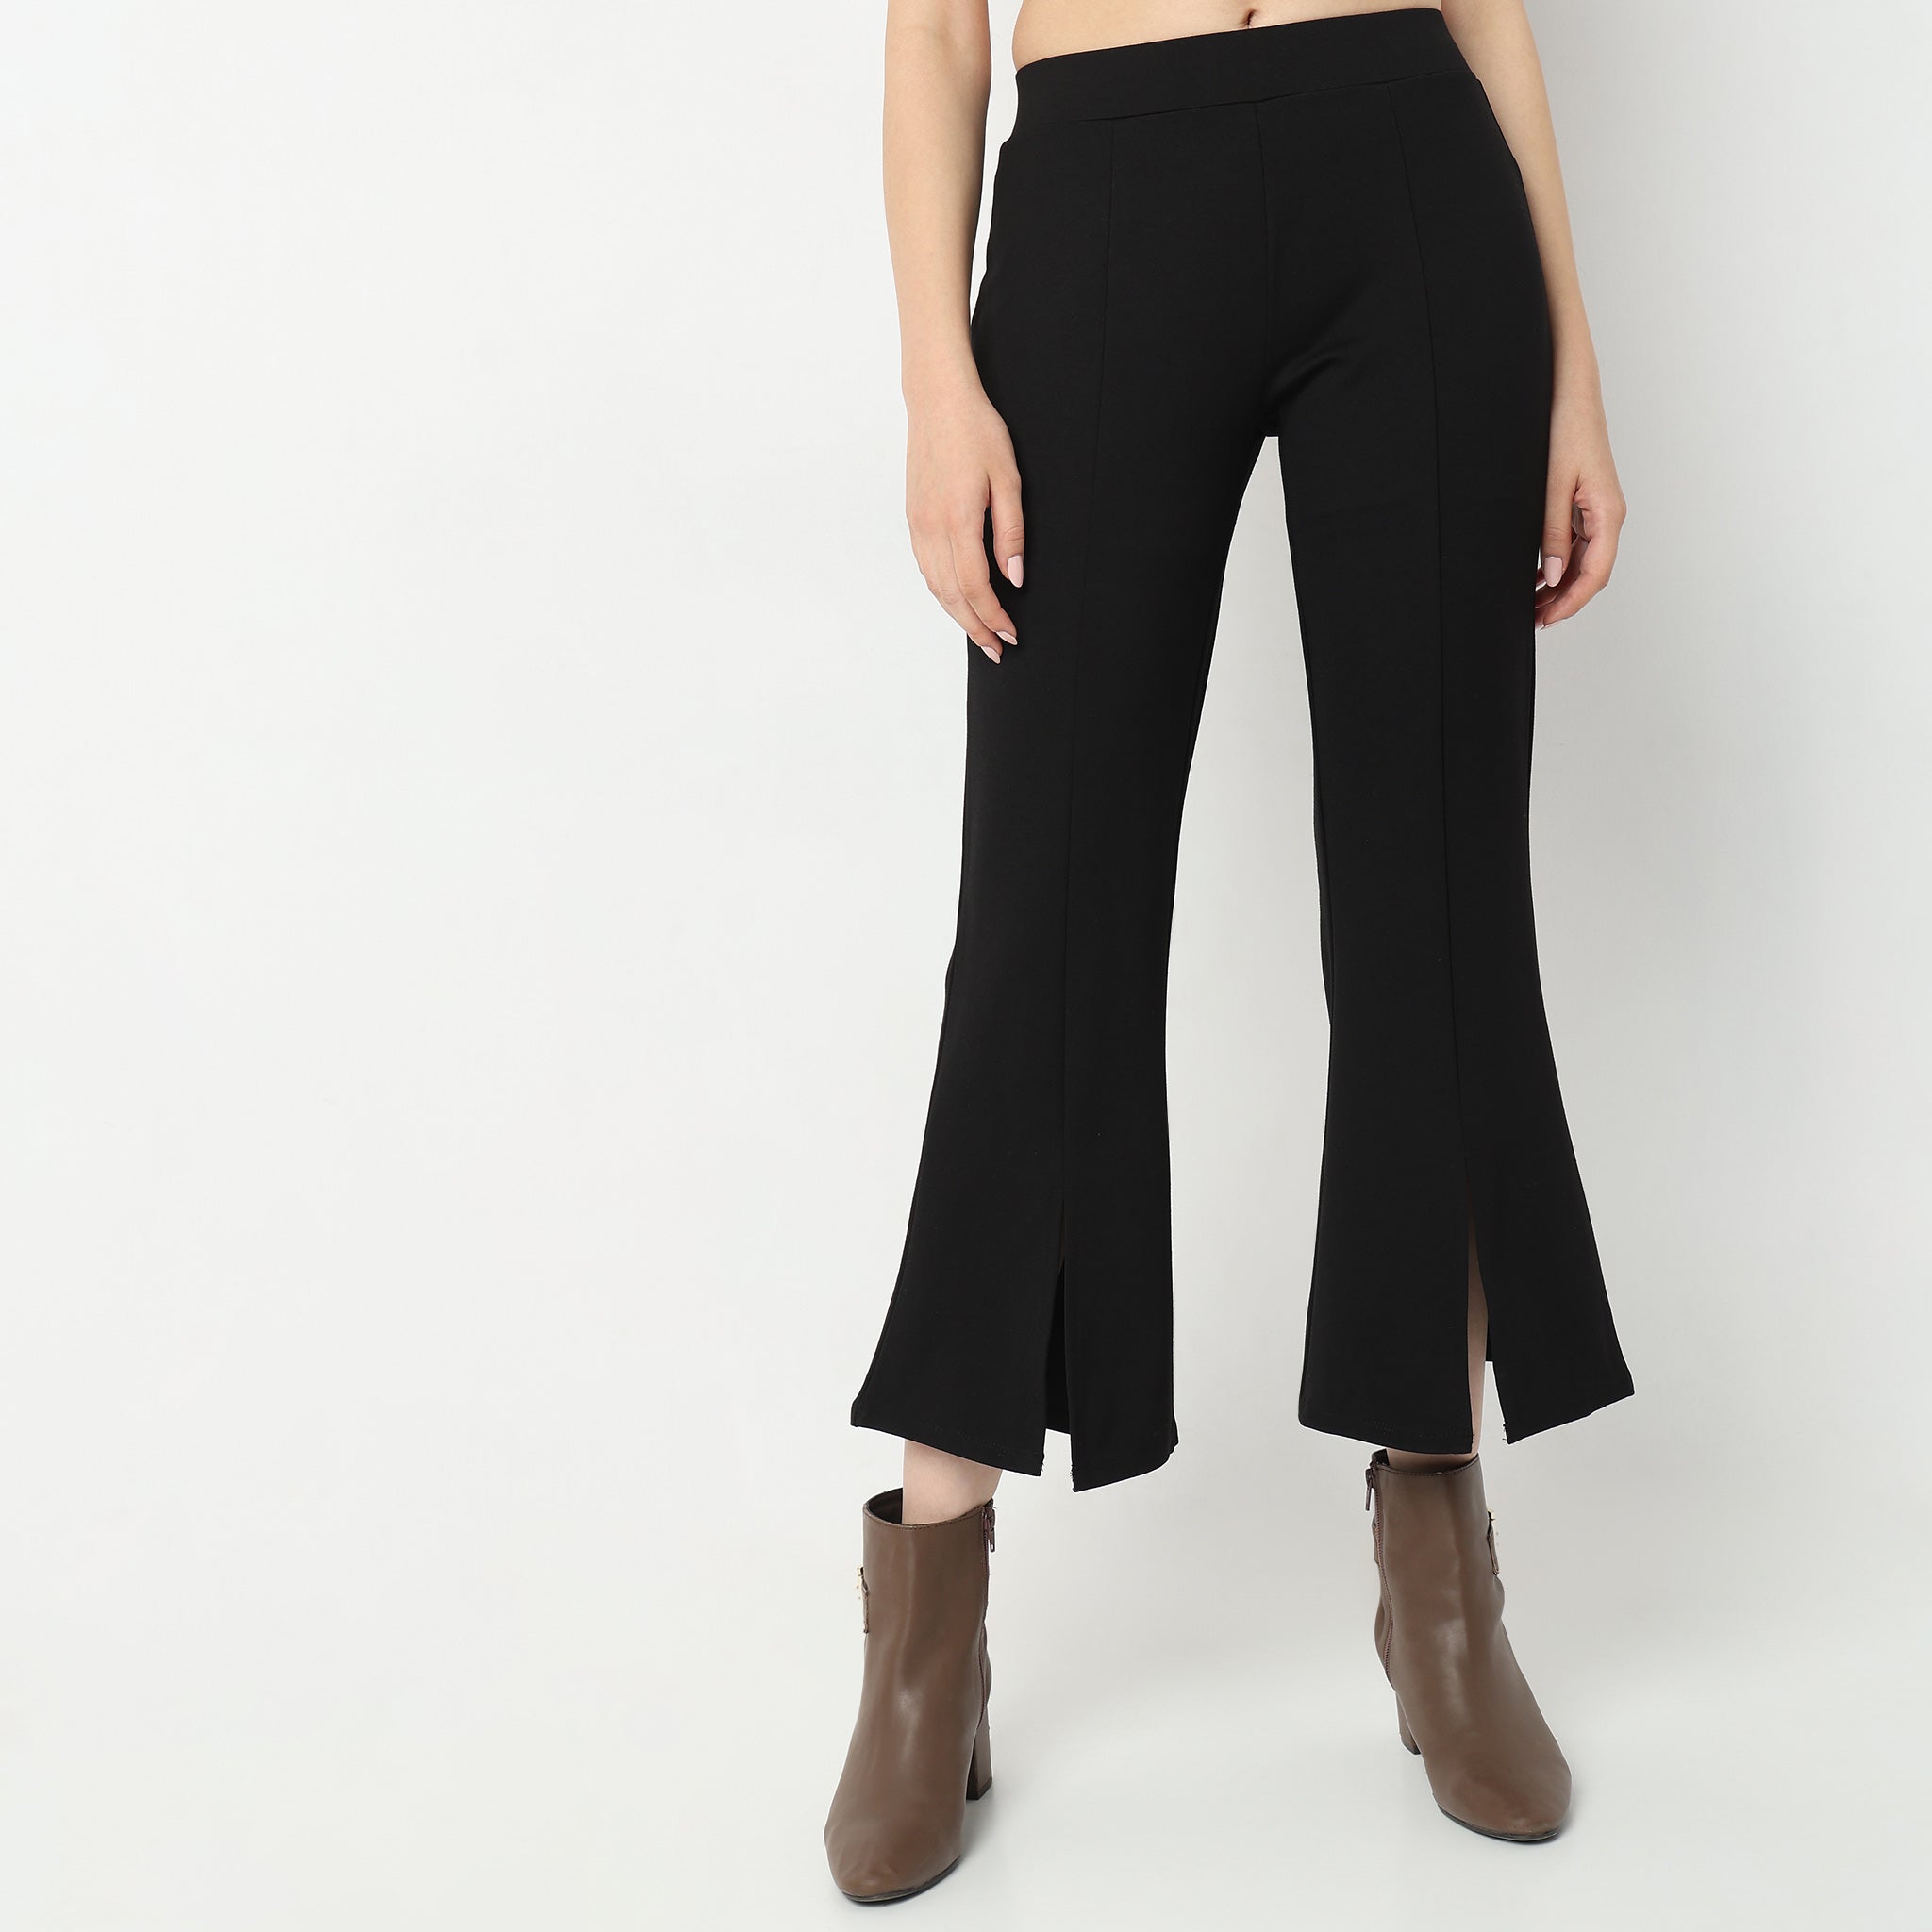 Skinny Fit Solid High Rise Jeggings